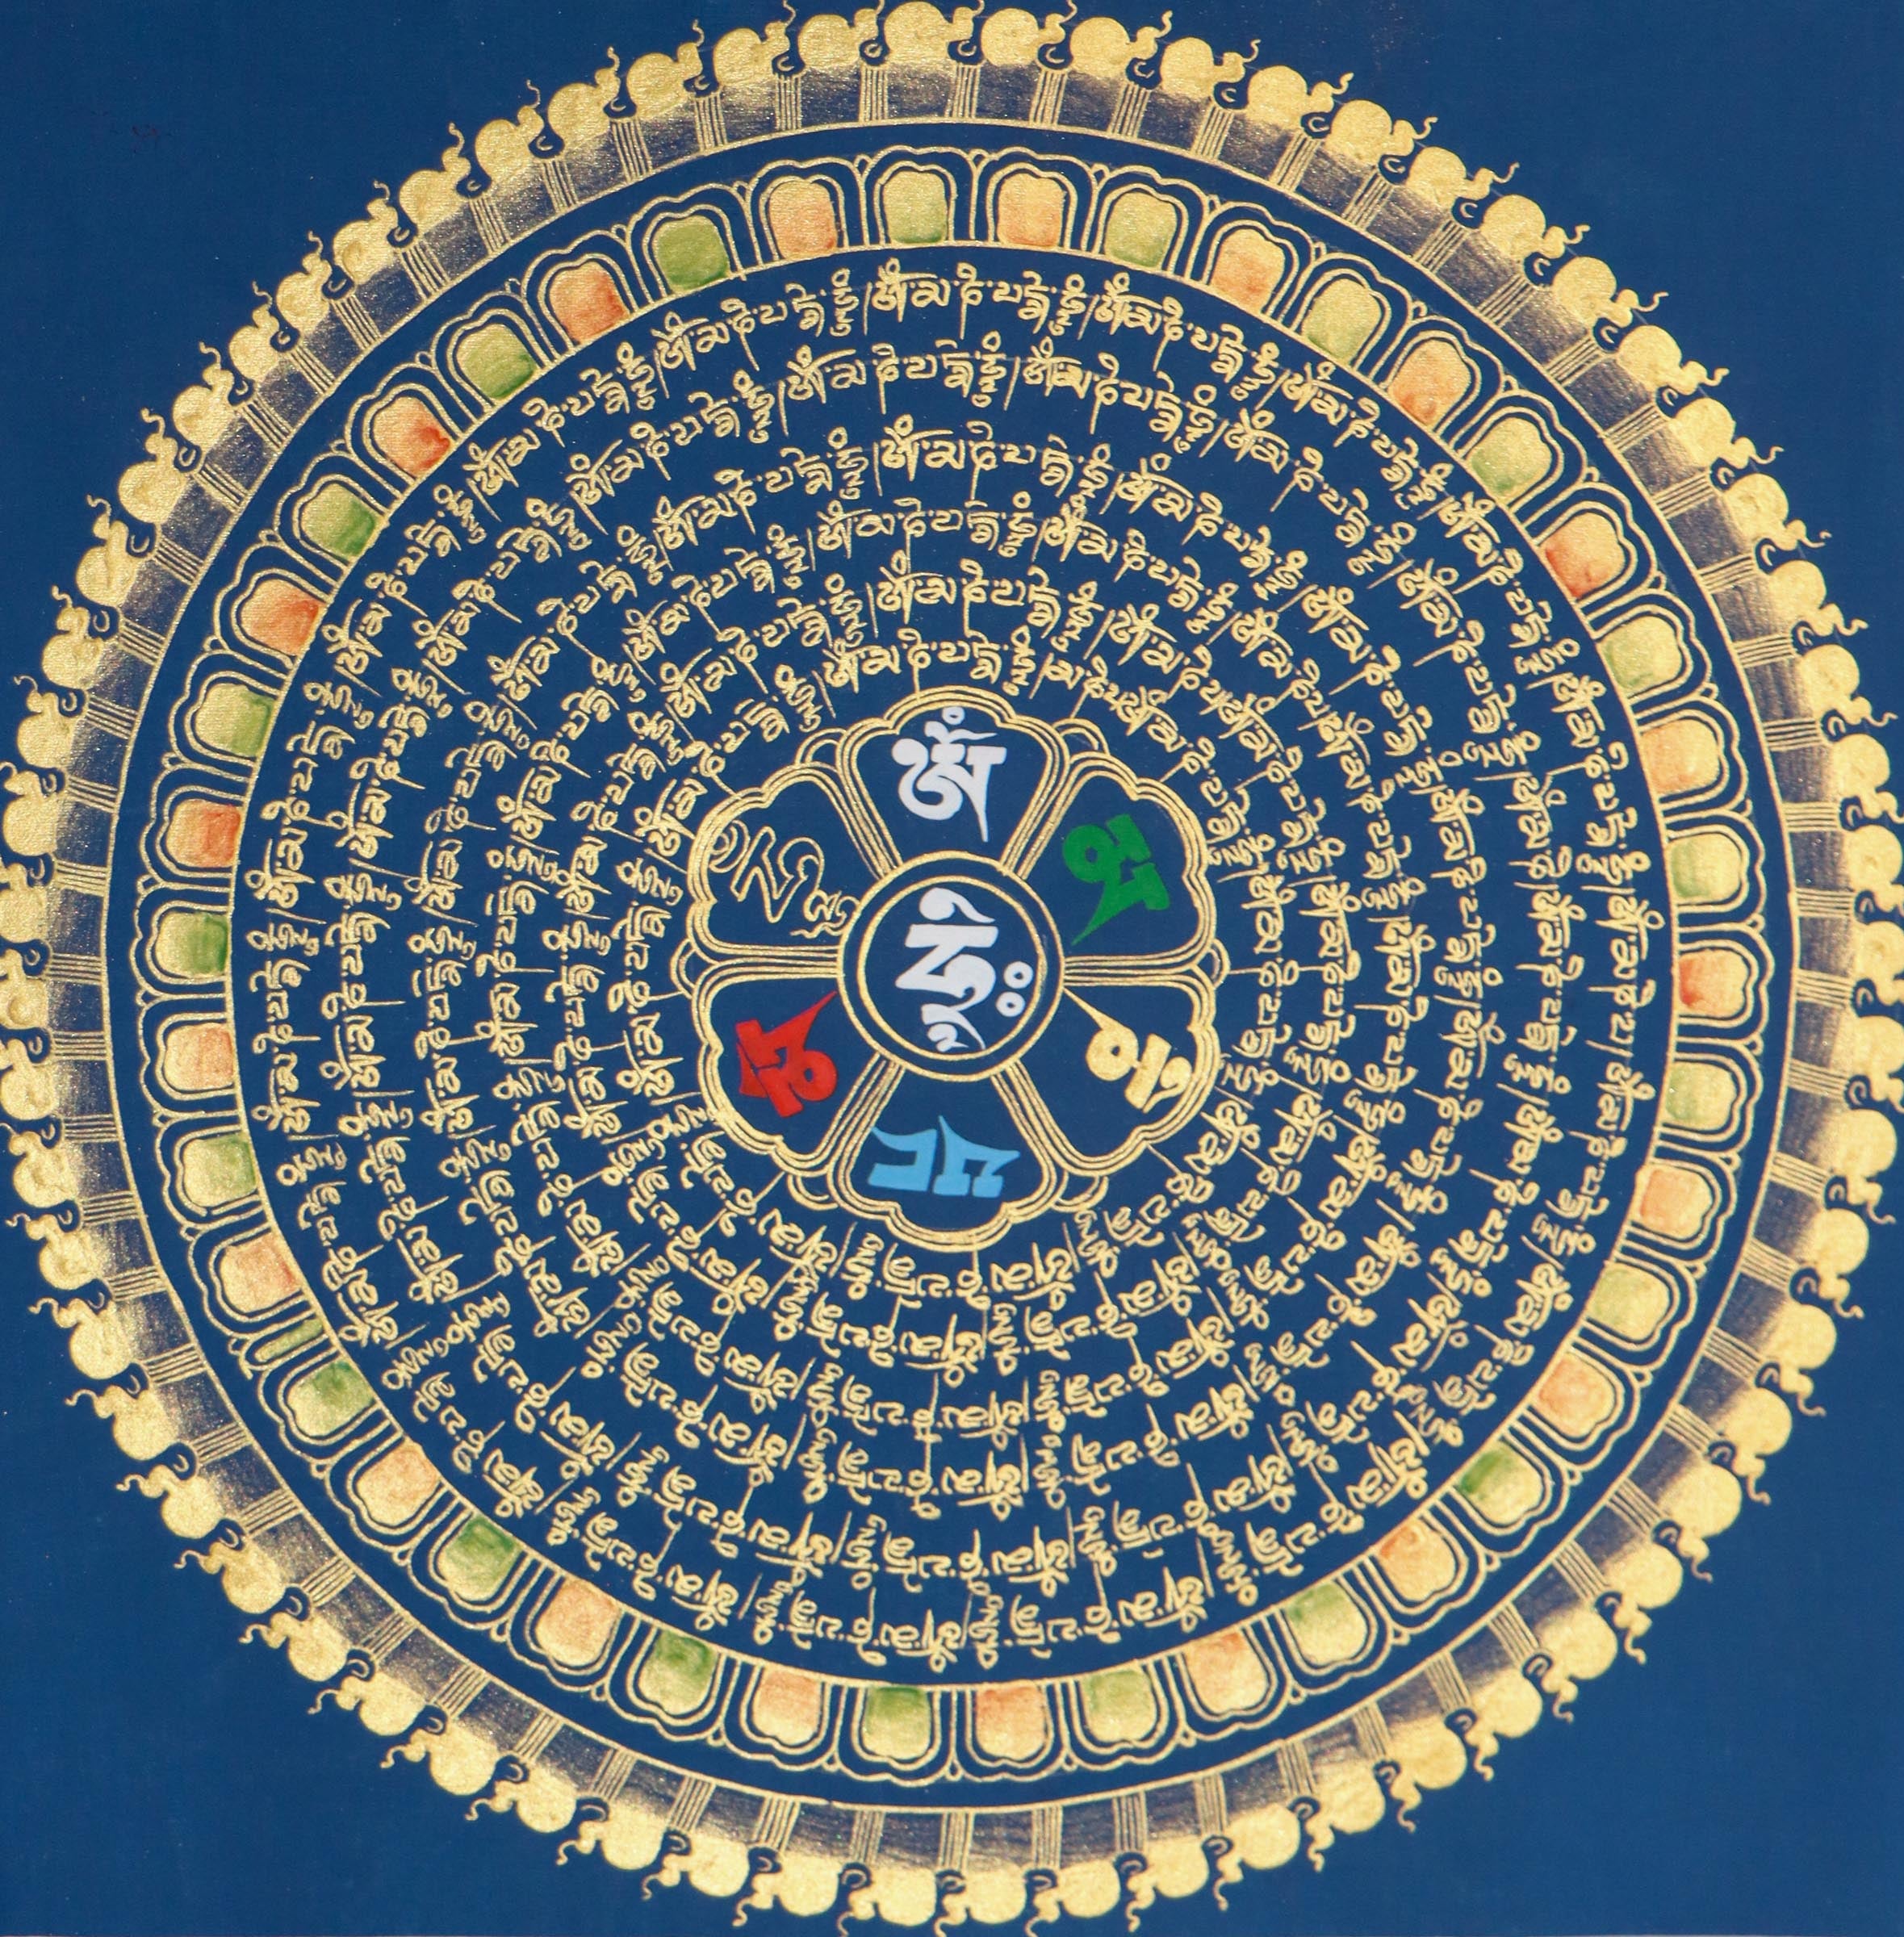 Blue Mantra Mandala Thangka with Om Mani Padme hum scripted in the centre.